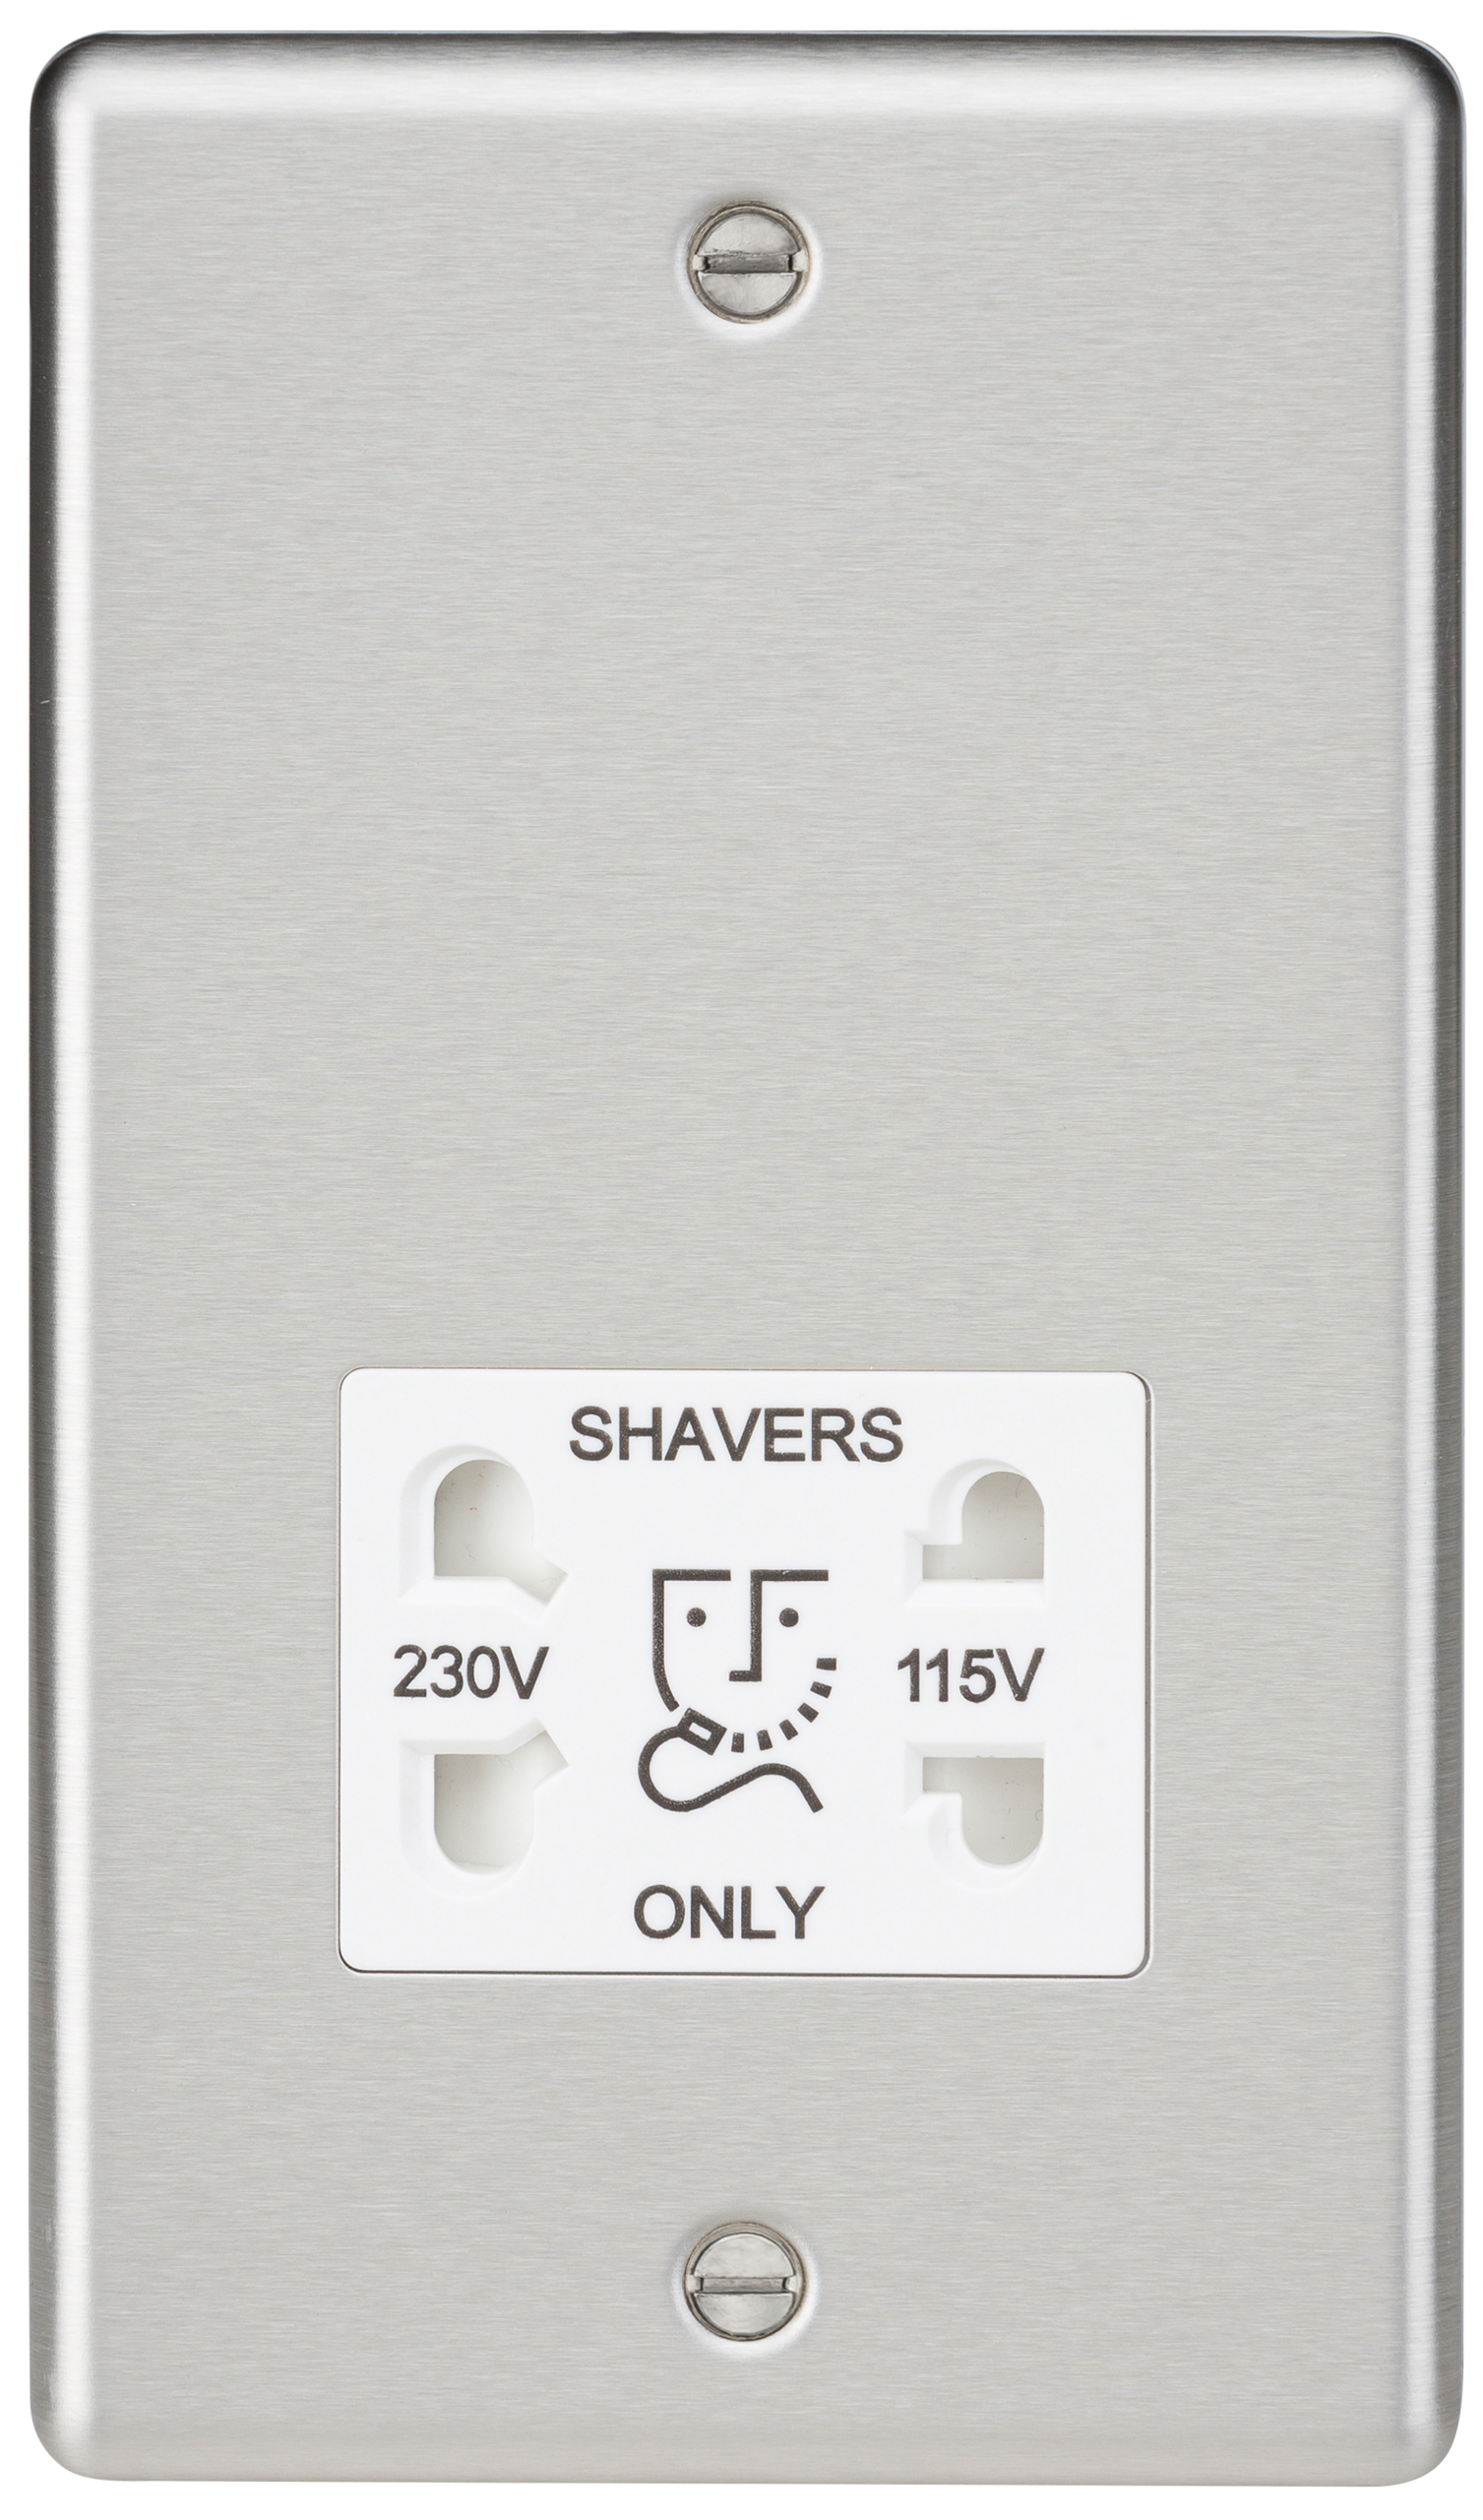 115-230V Dual Voltage Shaver Socket With White Insert - Rounded Edge Brushed Chrome - CL89BCW 